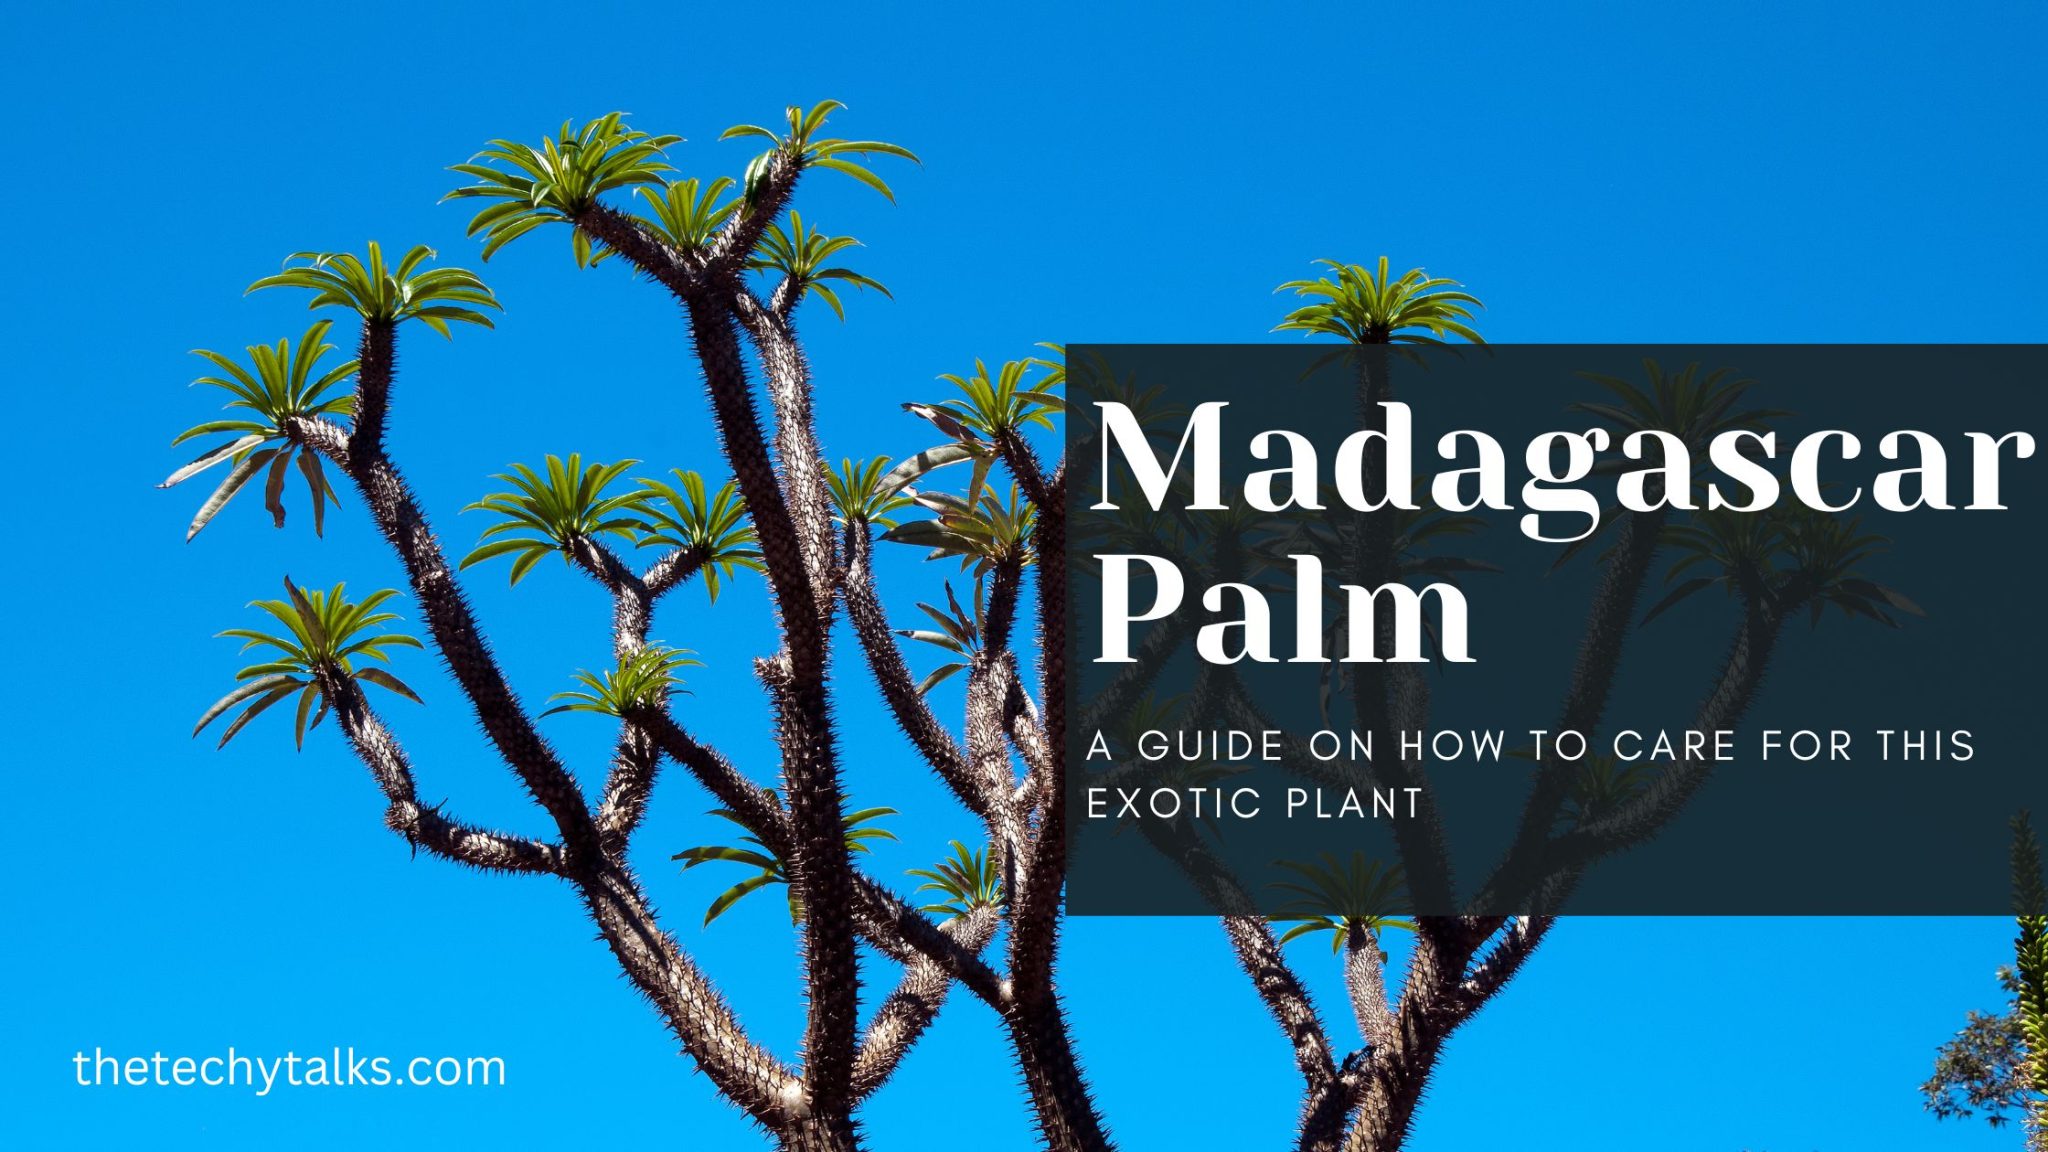 Madagascar Palm: A Guide on How to Care for This Exotic Plant